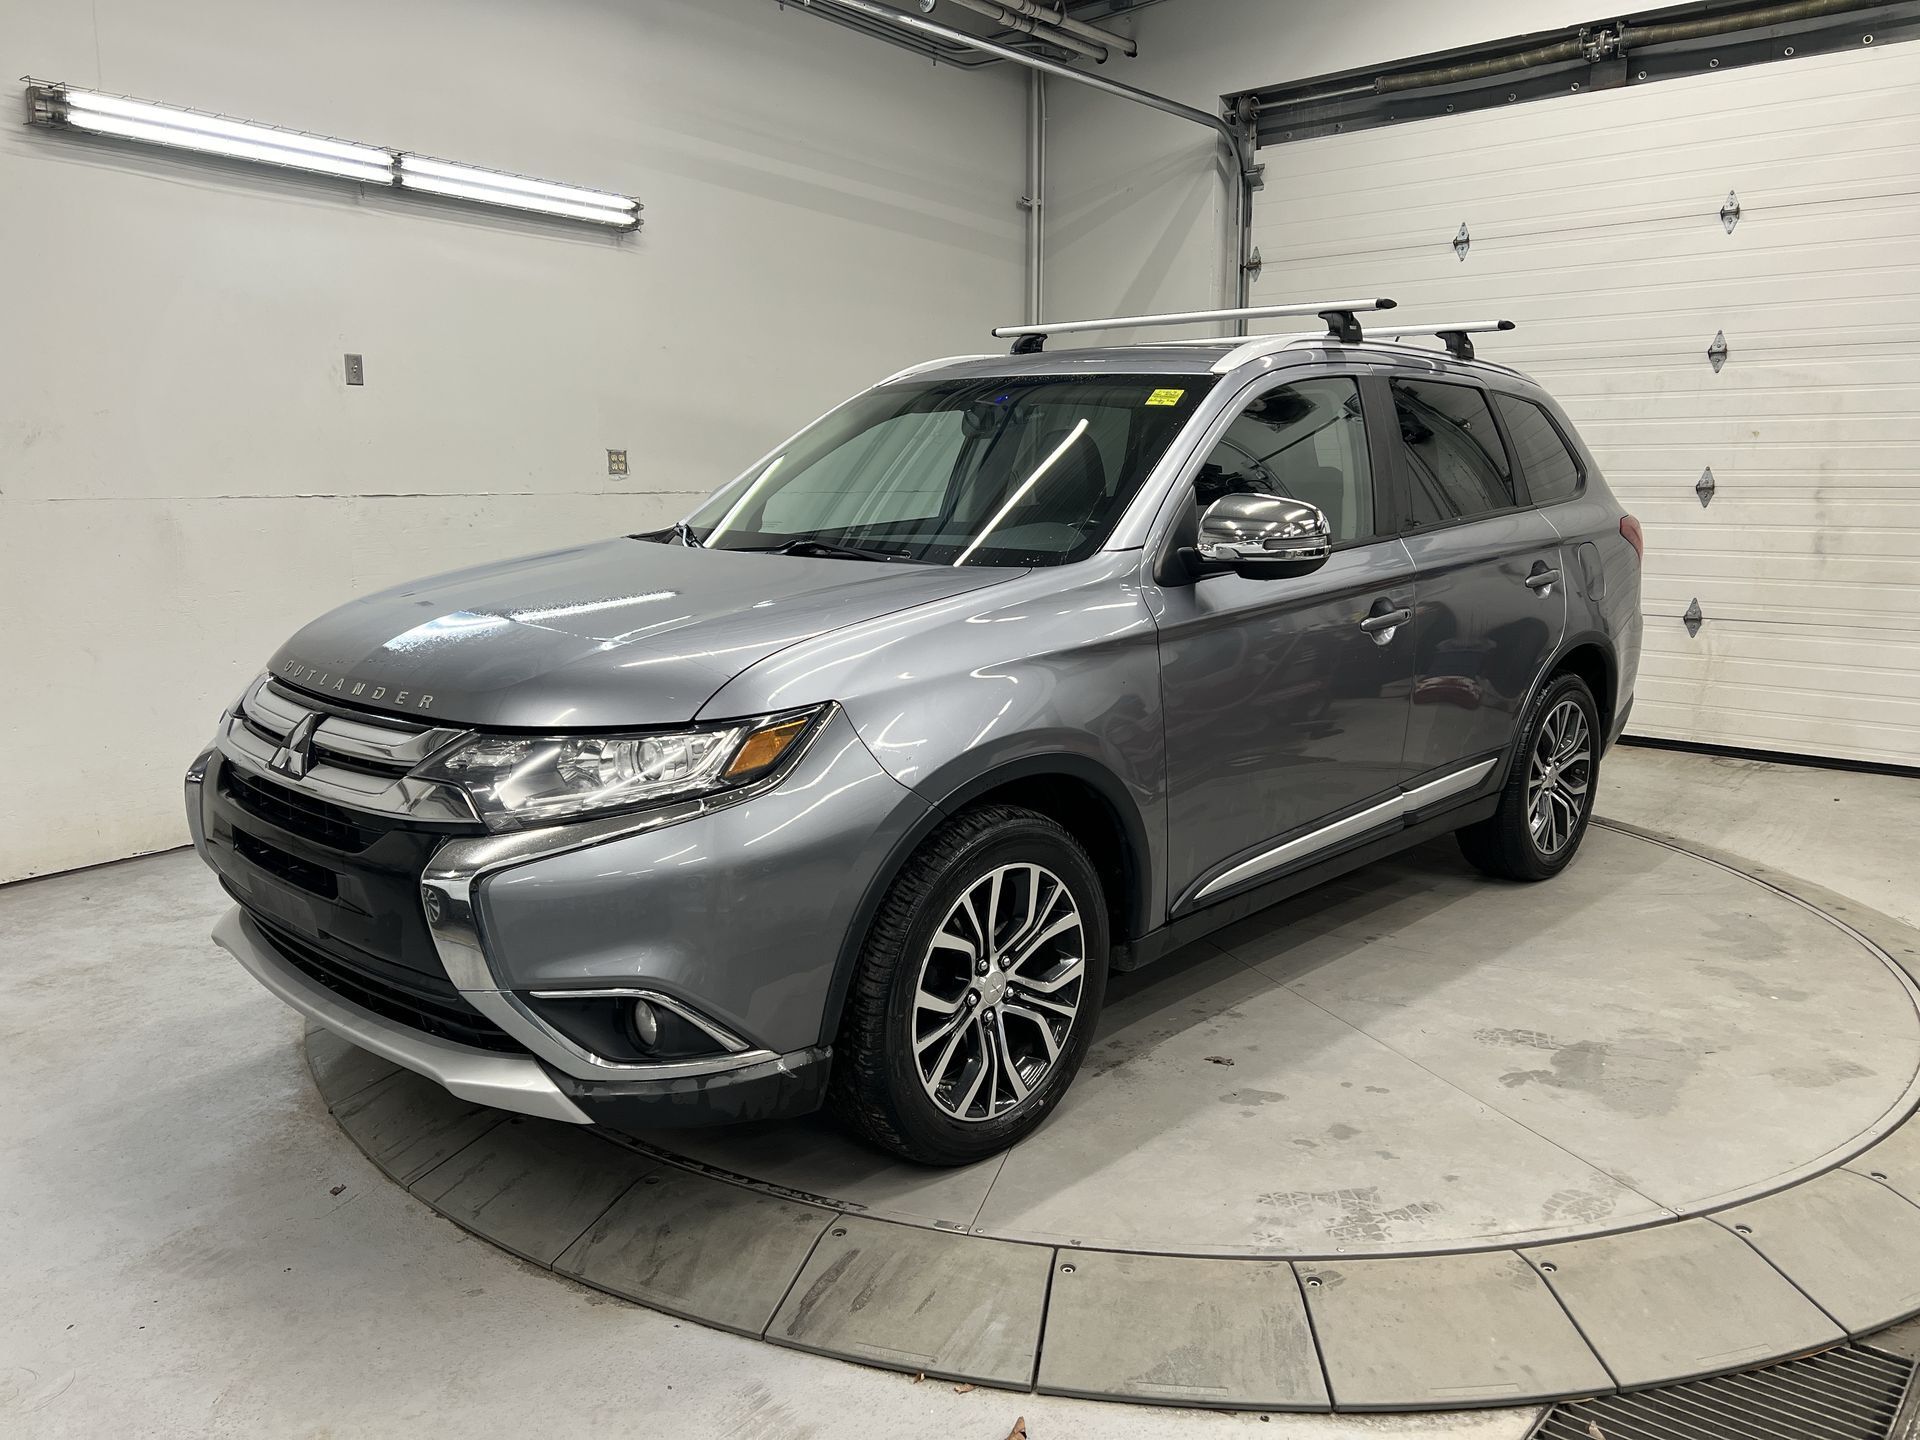 2016 Mitsubishi Outlander ES PREMIUM AWC | SUNROOF | LEATHER | LOW KMS!